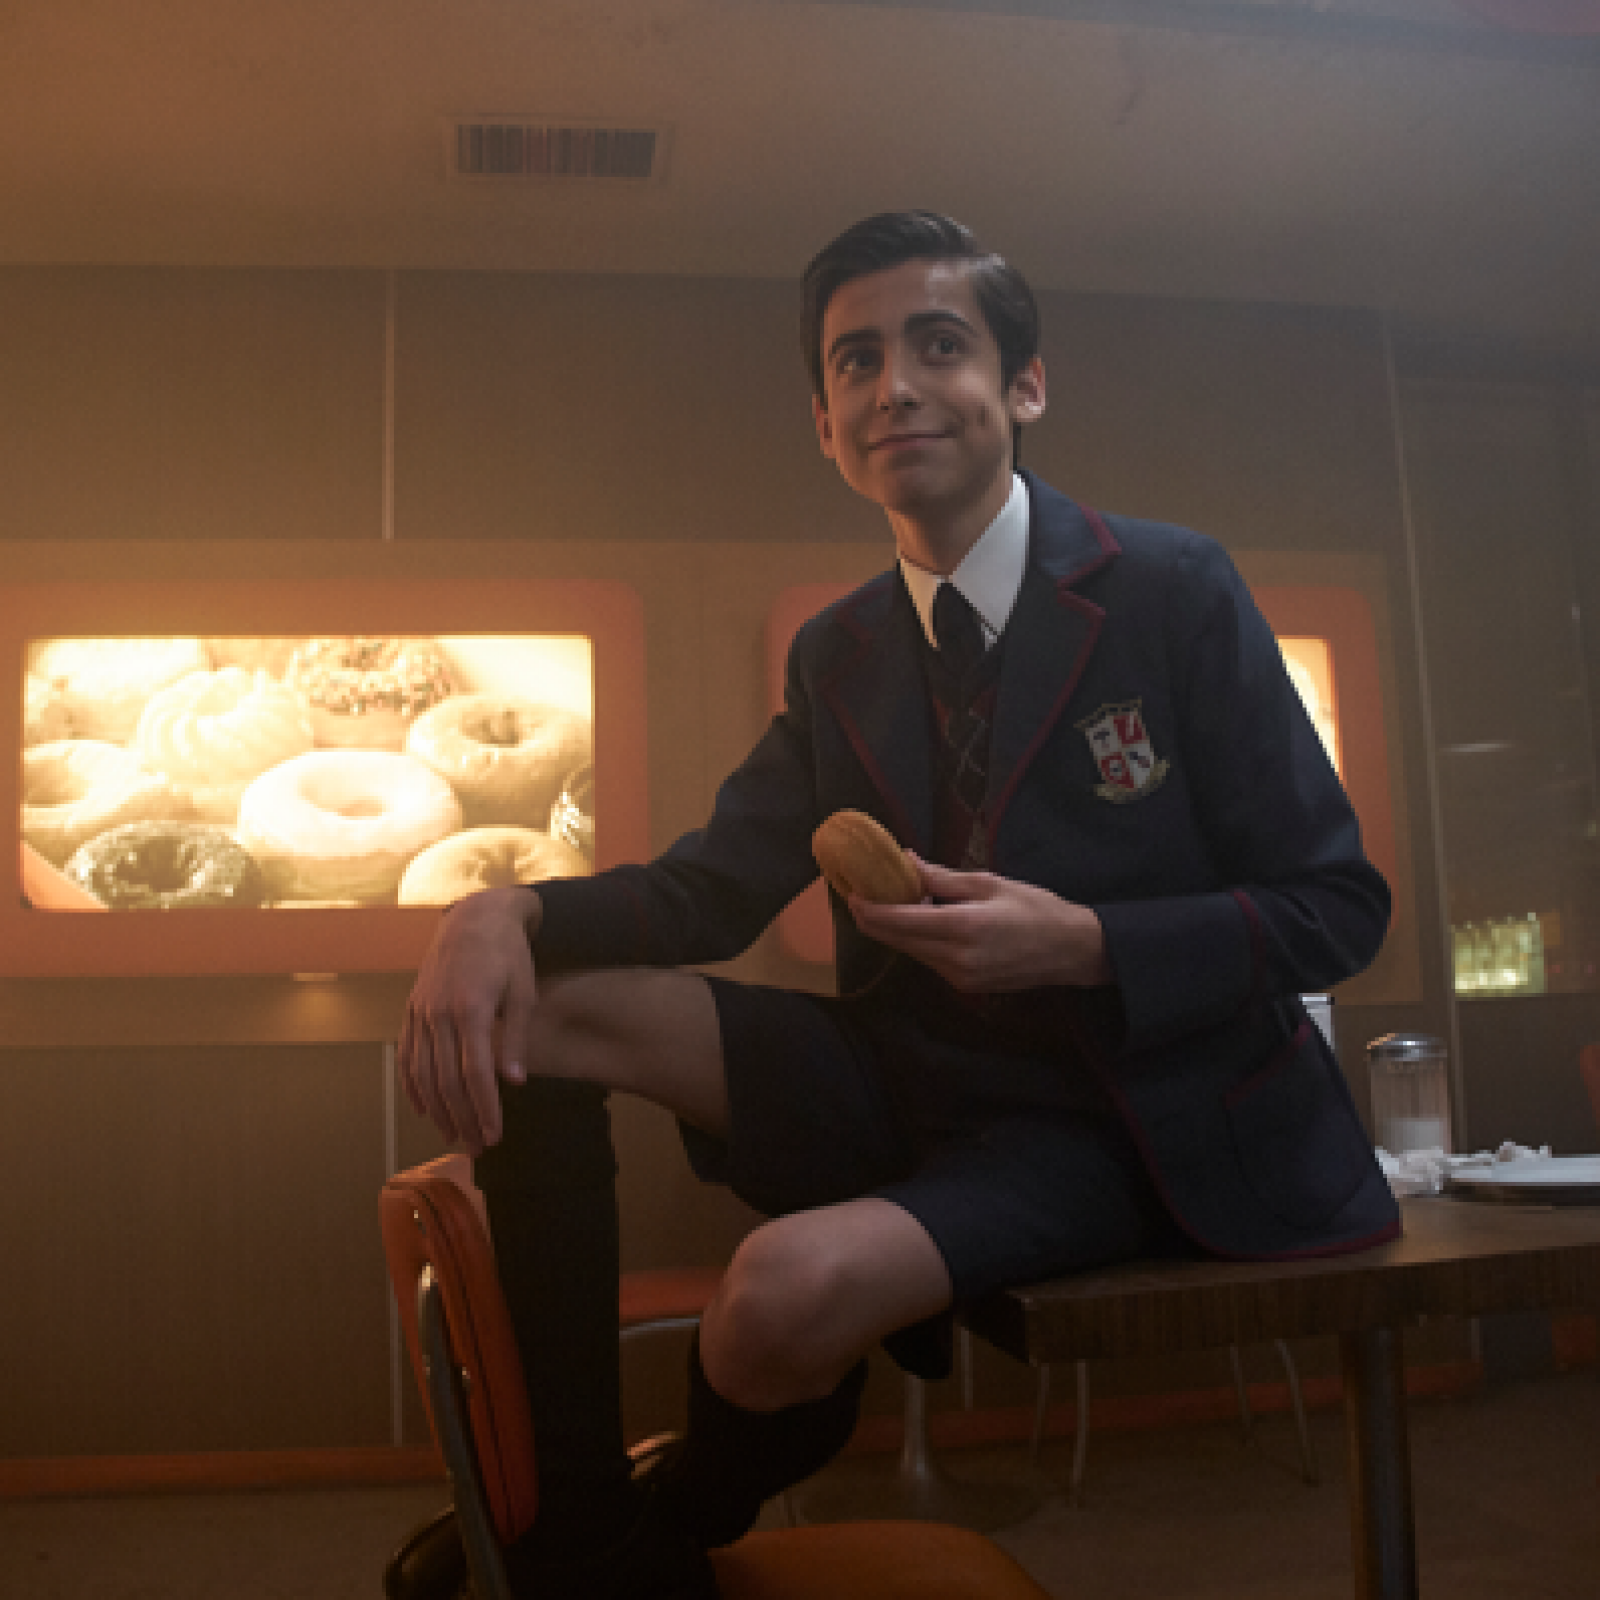 Dor Winkelcentrum Mineraalwater The Umbrella Academy' Star Aidan Gallagher Says, 'Comic Fans Are Going to  Go Crazy' Over New Netflix Show